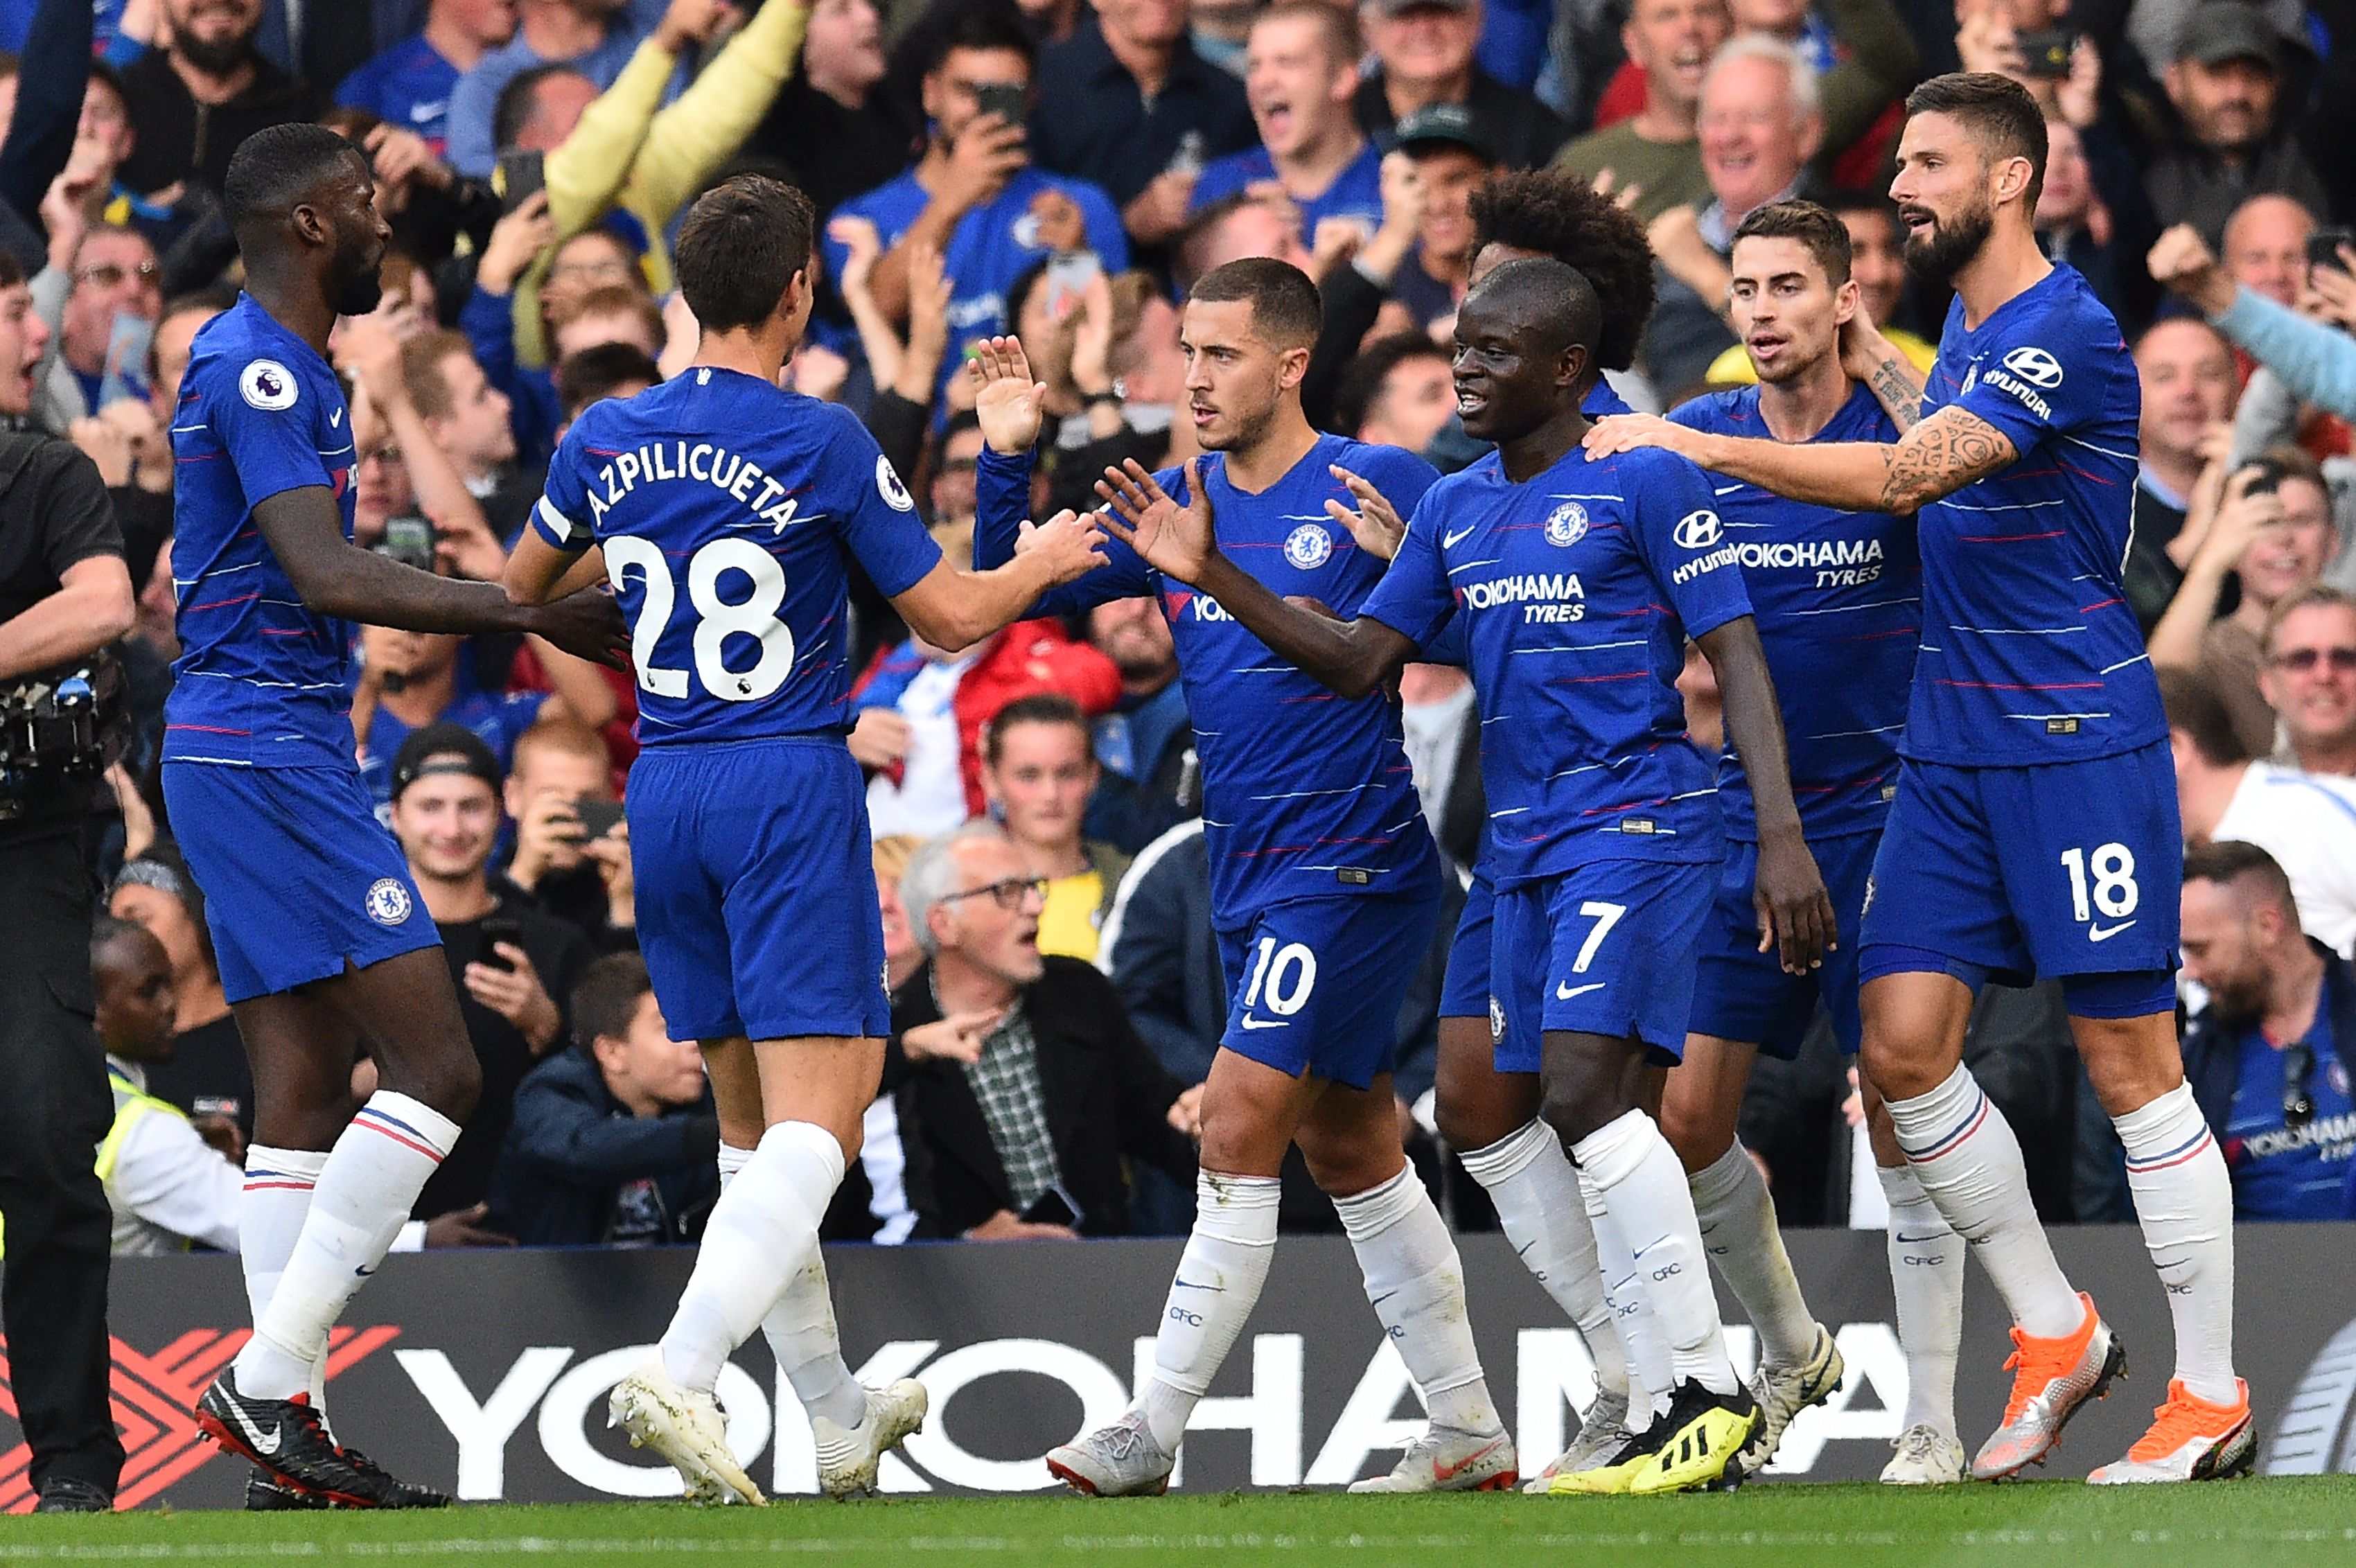 Chelsea's Belgian midfielder Eden Hazard (C) celeb rates with teammates after scoring the team's first goal during the English Premier League football match between Chelsea and Liverpool at Stamford Bridge in London on September 29, 2018. (Photo by Glyn KIRK / AFP) / RESTRICTED TO EDITORIAL USE. No use with unauthorized audio, video, data, fixture lists, club/league logos or 'live' services. Online in-match use limited to 120 images. An additional 40 images may be used in extra time. No video emulation. Social media in-match use limited to 120 images. An additional 40 images may be used in extra time. No use in betting publications, games or single club/league/player publications. /         (Photo credit should read GLYN KIRK/AFP/Getty Images)